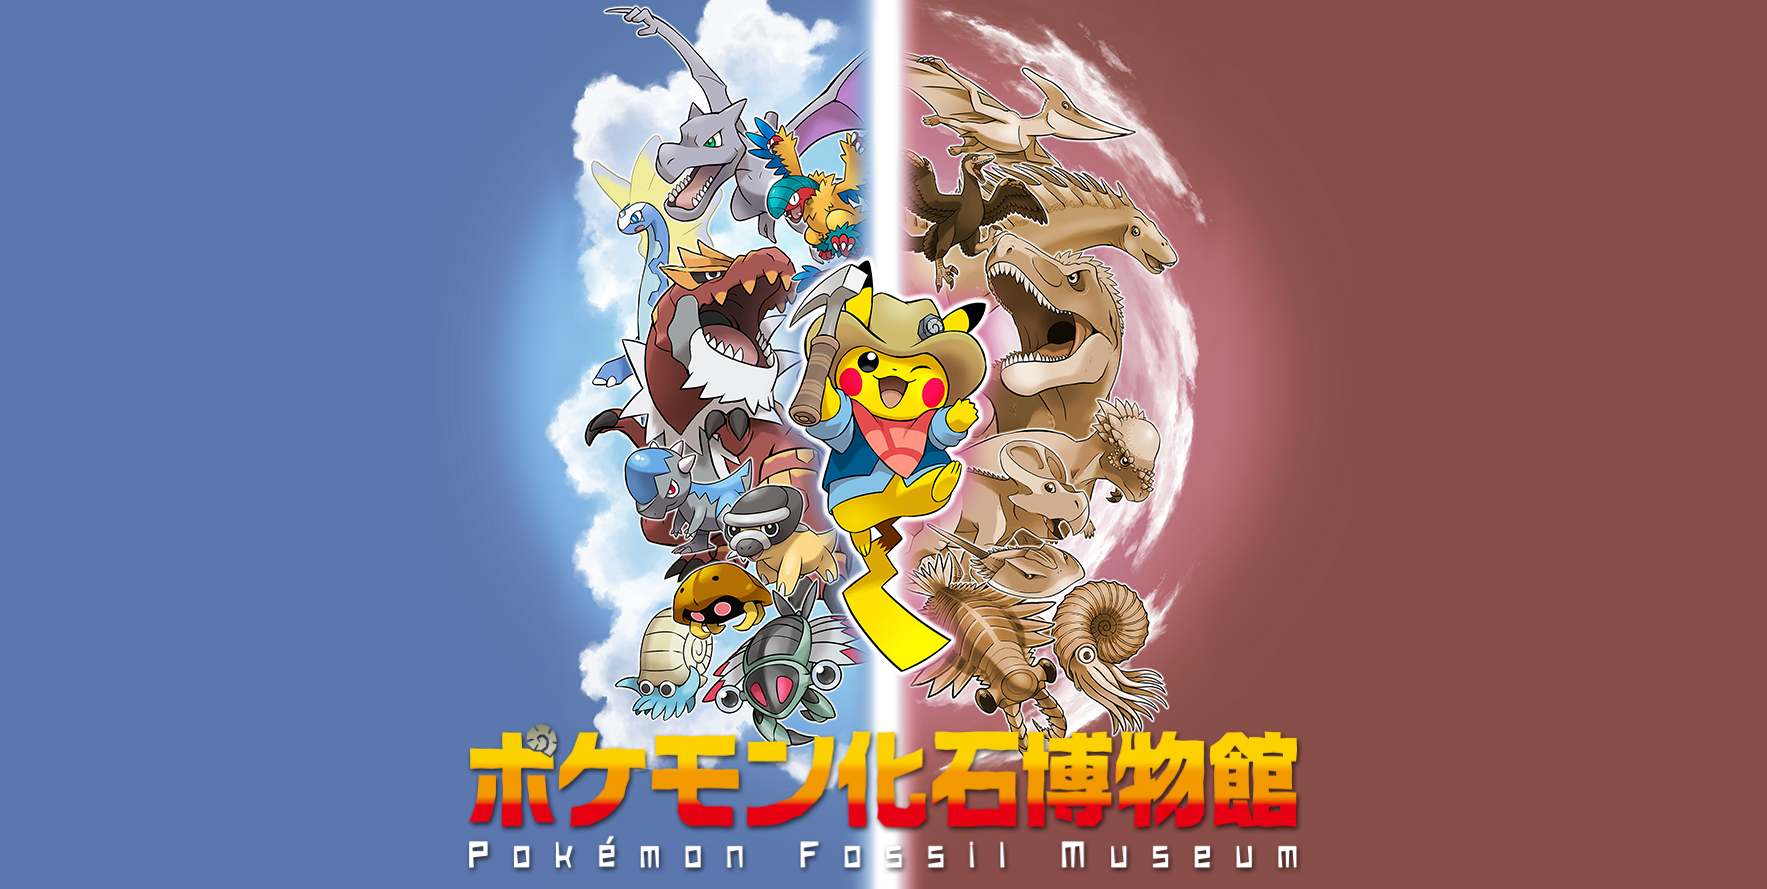 Pokémon Fossil Museum to Open in Japan This Summer